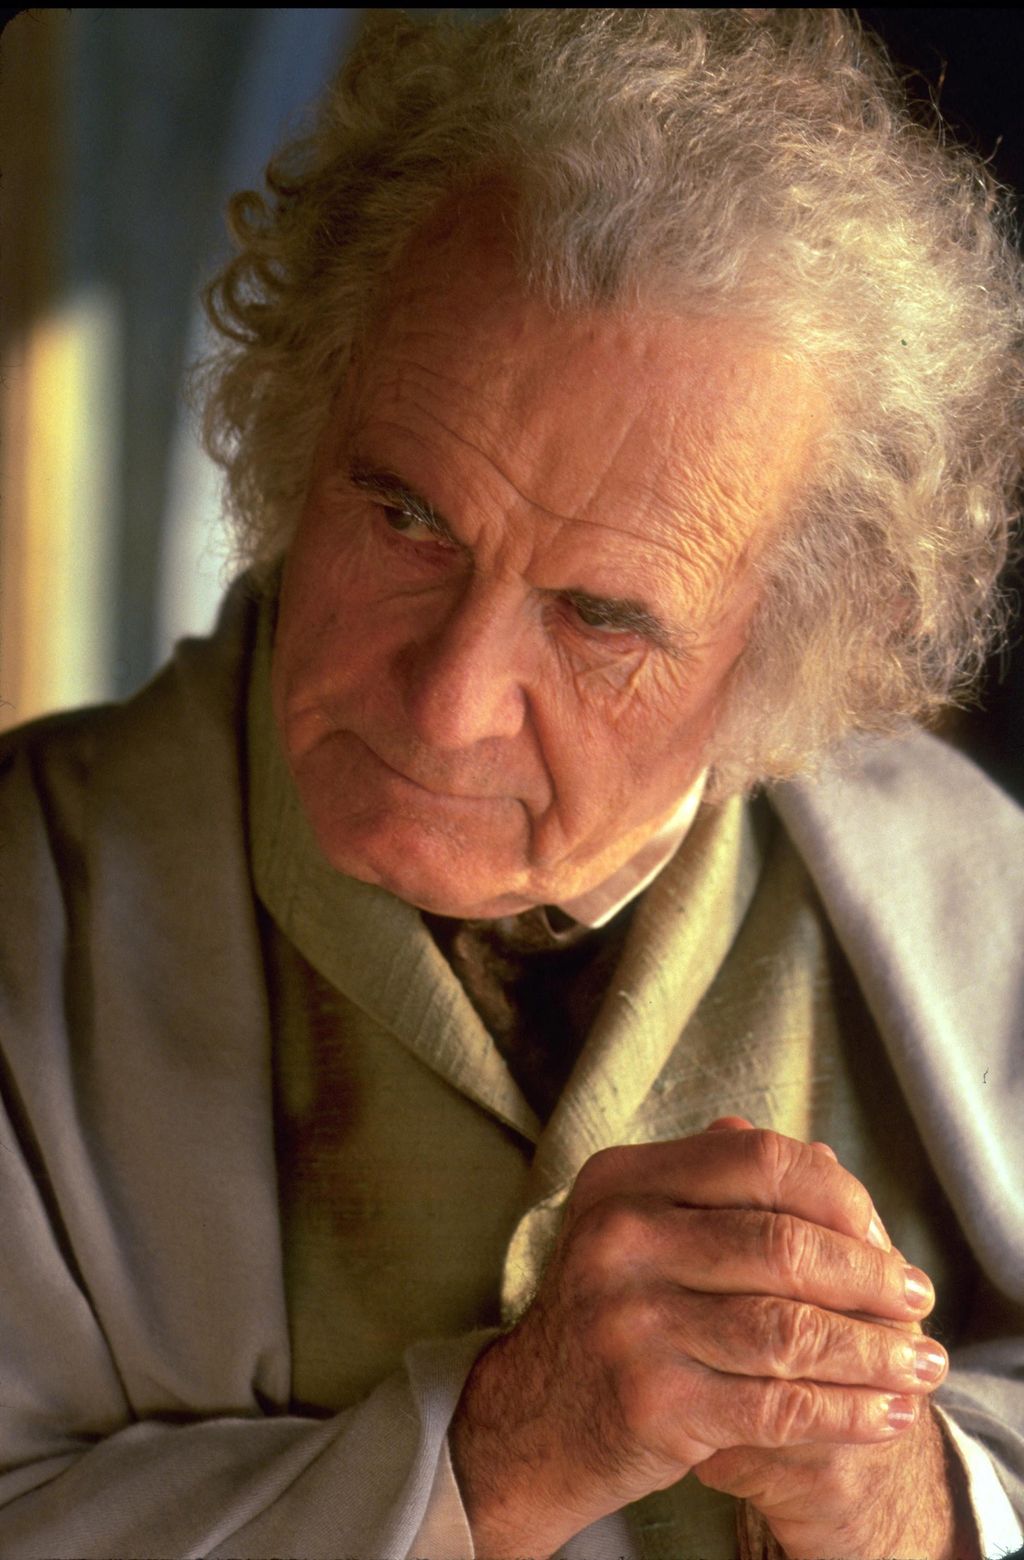 The Lord of the Rings : The Fellowship of the Ring Cinema fantasy hobbit bilbo Tolkien Vertical MAN PORTRAIT 